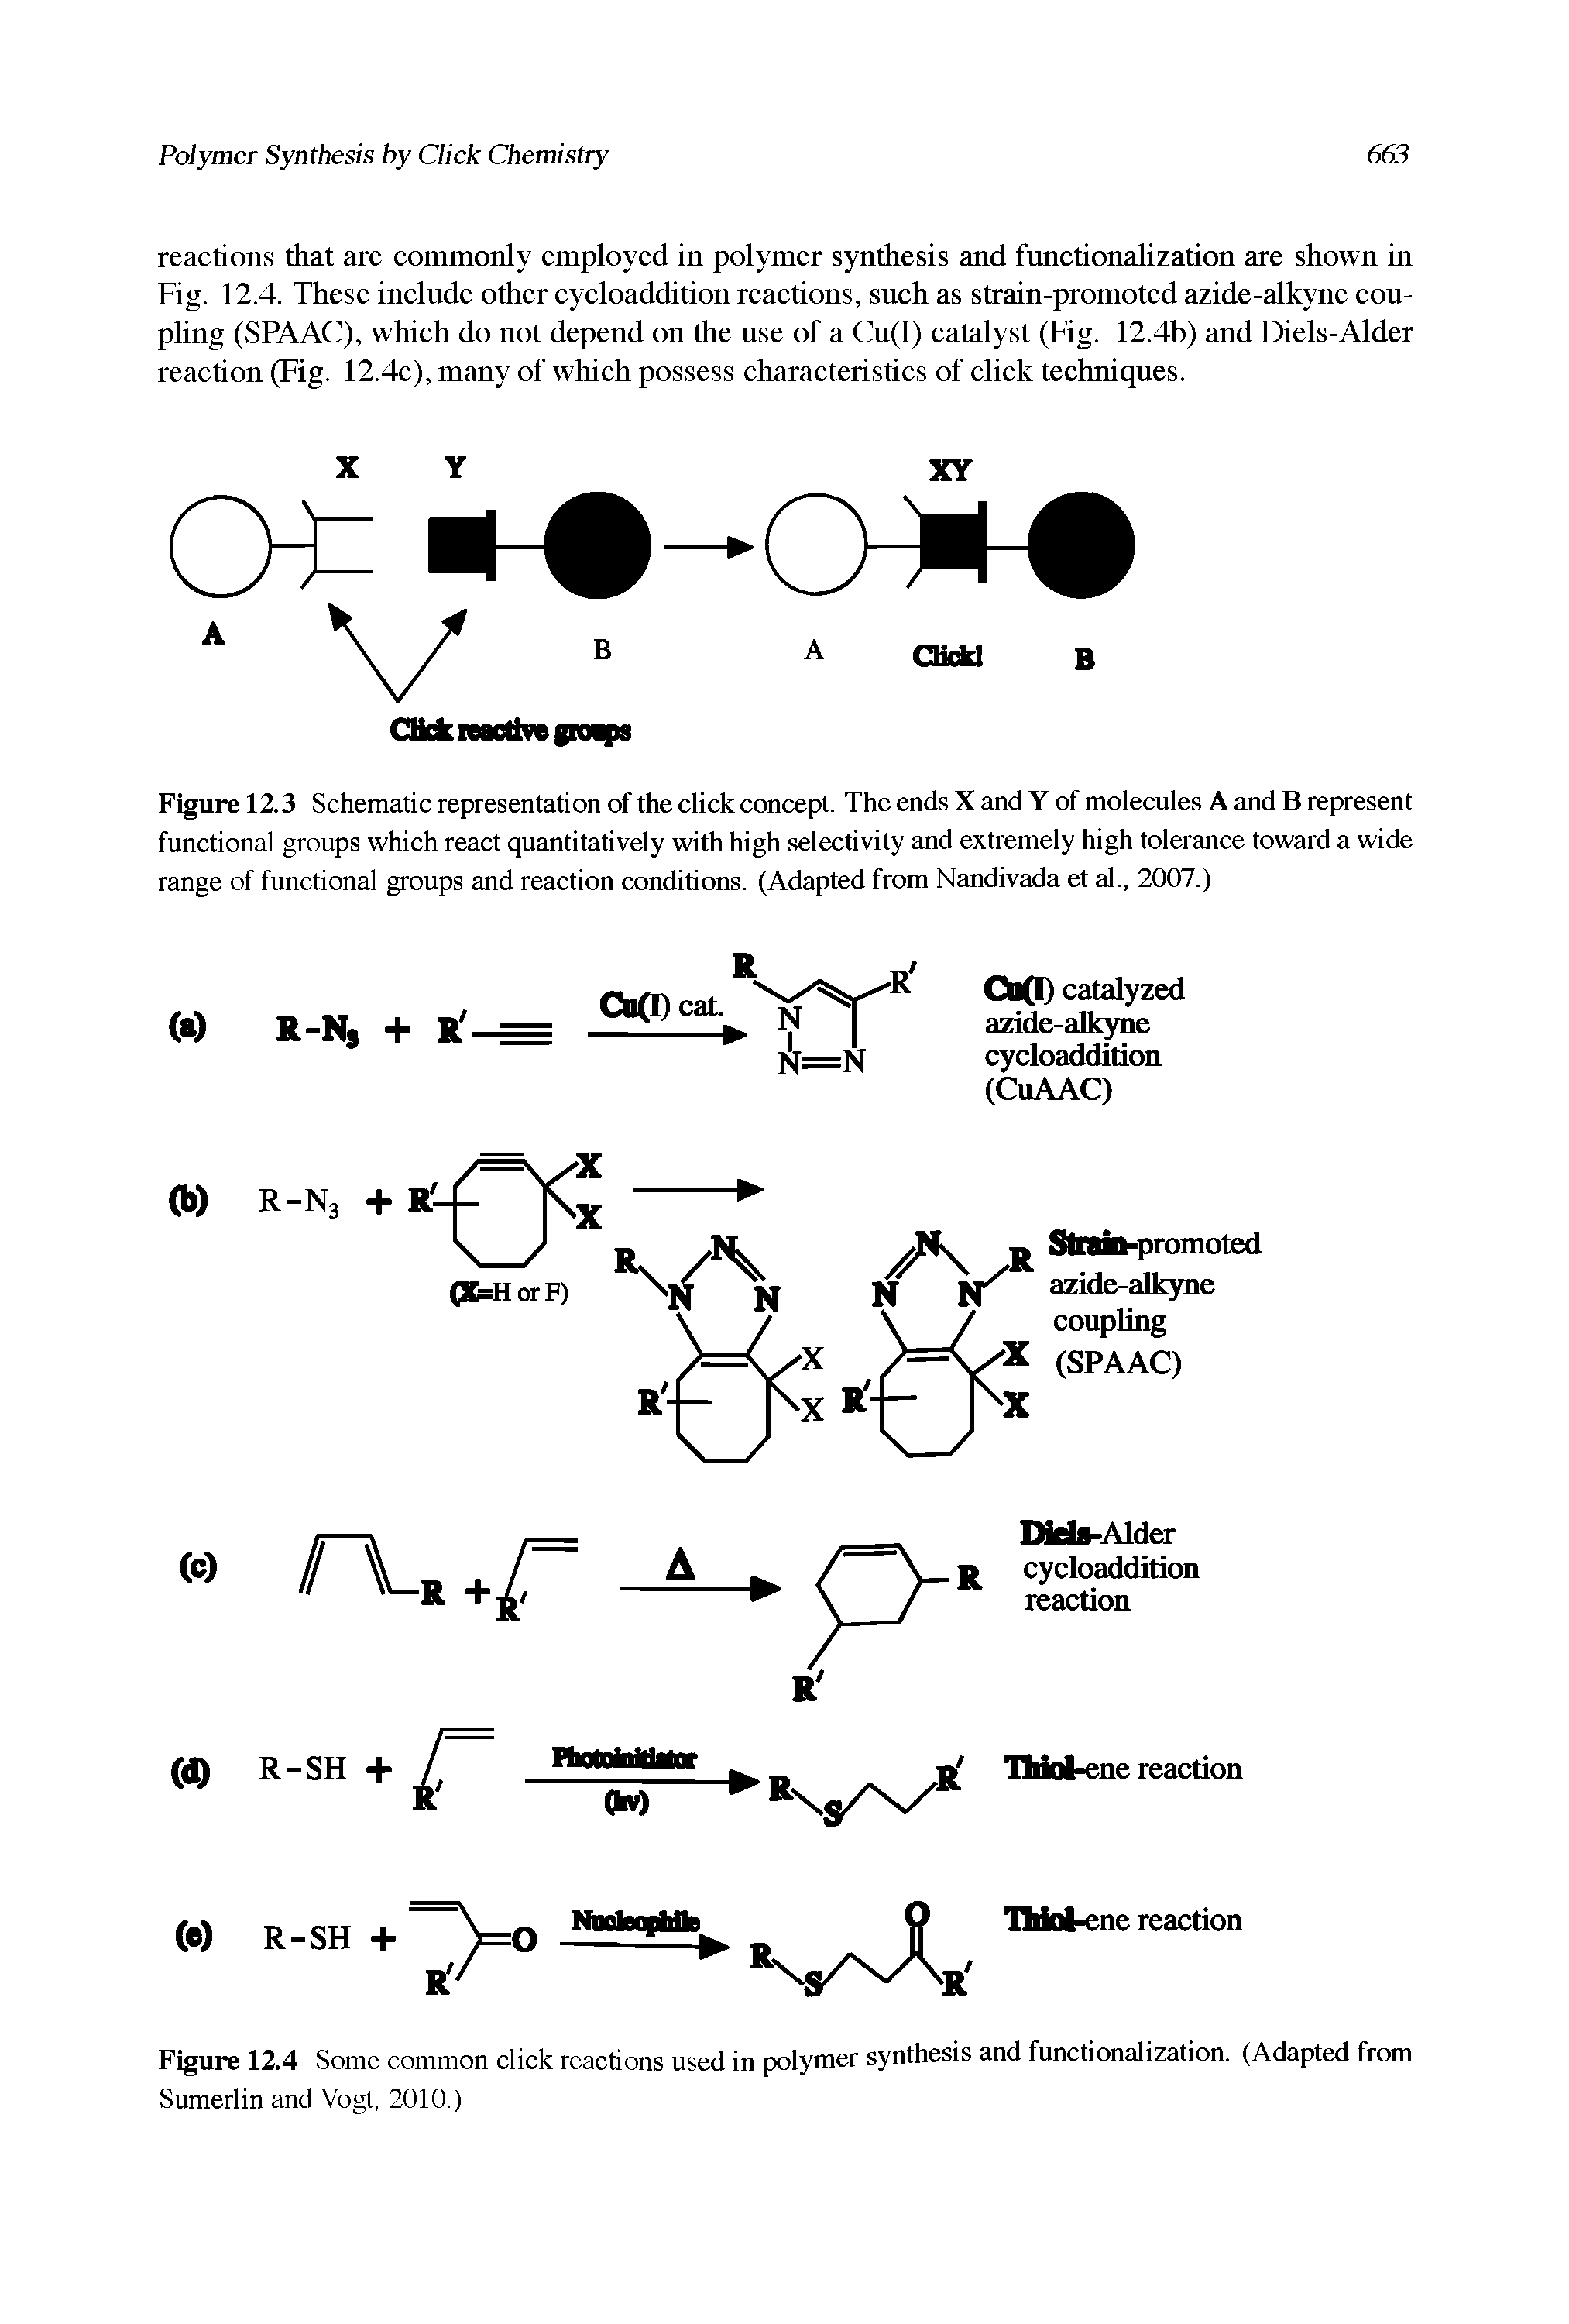 Figure 12.4 Some common click reactions used in polymer synthesis and functionalization. (Adapted from Sumerlin and Vogt, 2010.)...